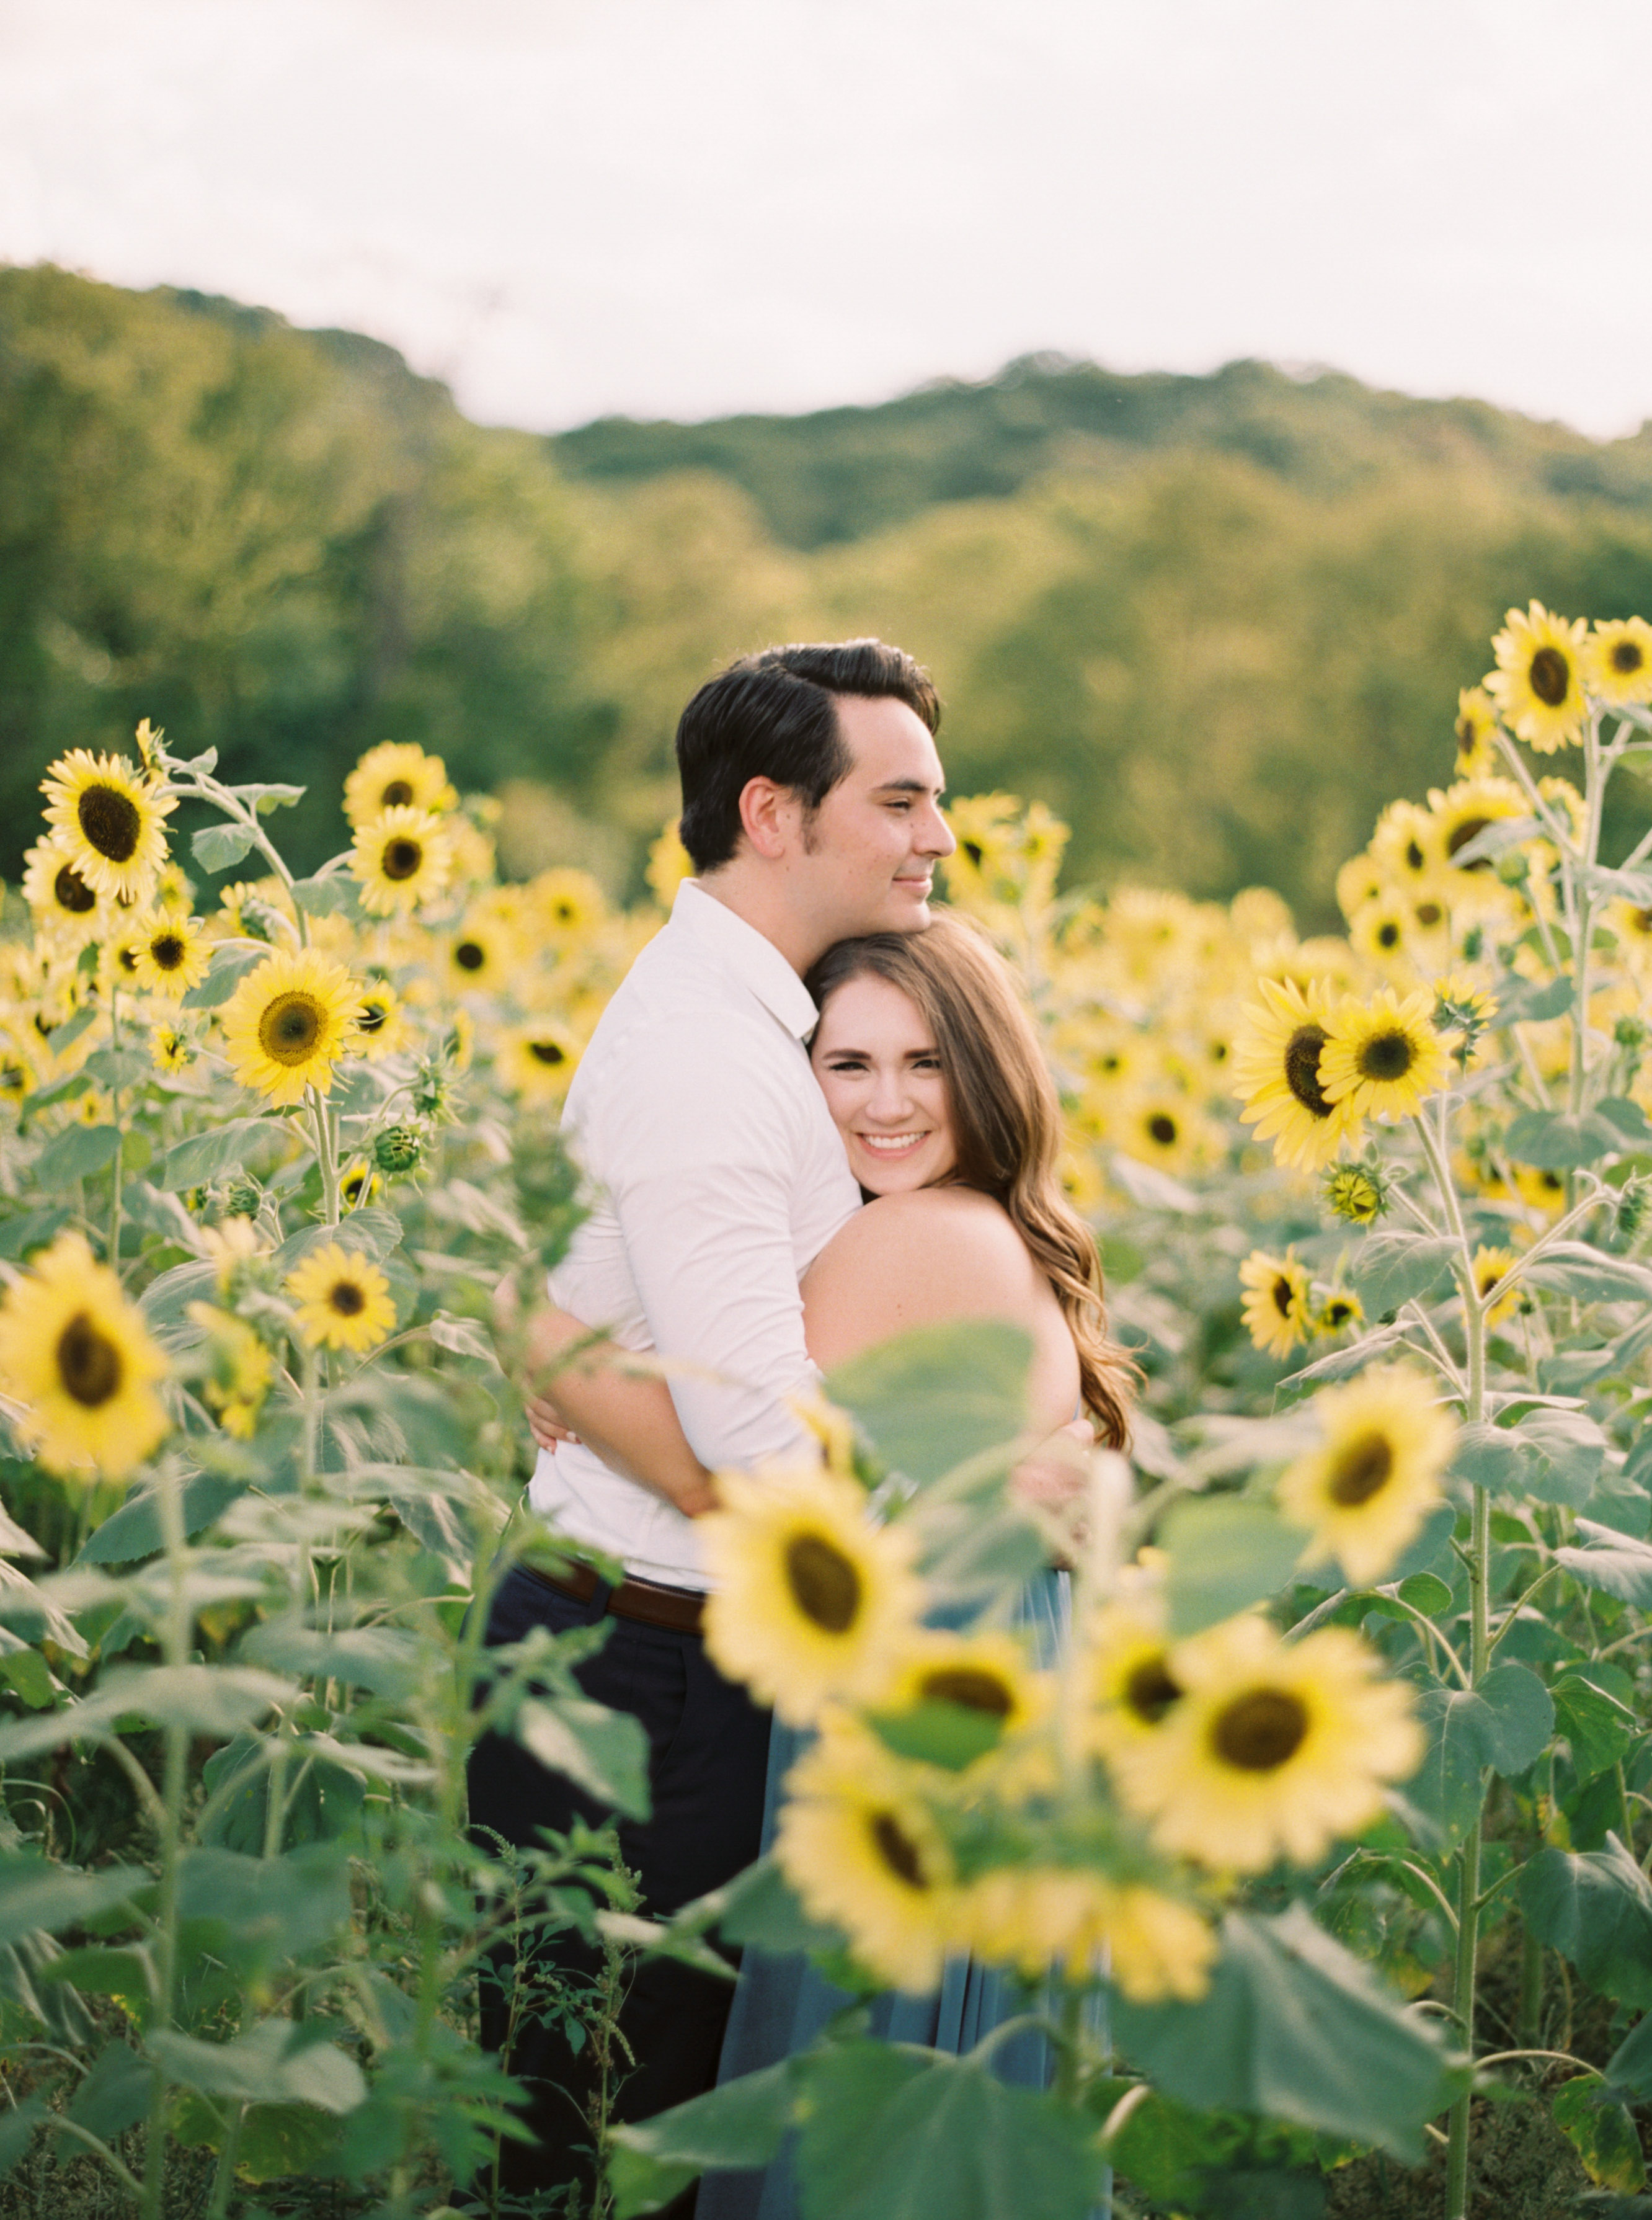 rich in color photo of couple in sunflowers